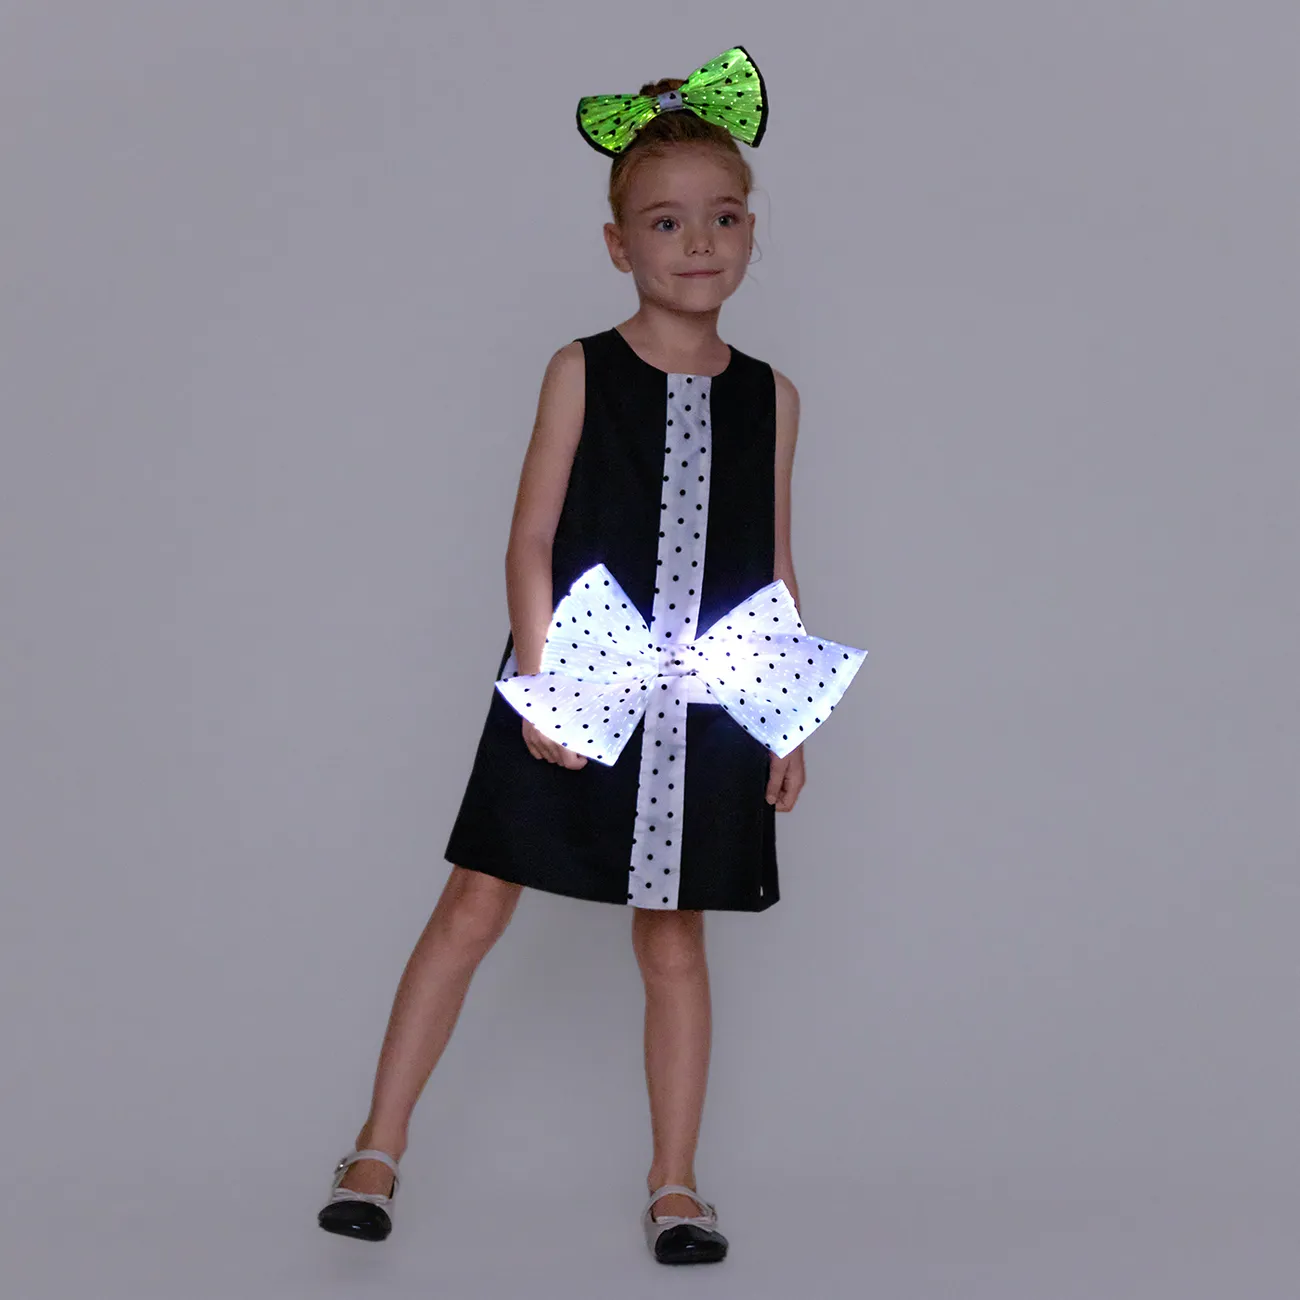 Go-Glow Illuminating Kid Black Dress with Light Up Removable Bowkont  Including Controller (Battery Inside) BlackandWhite big image 1